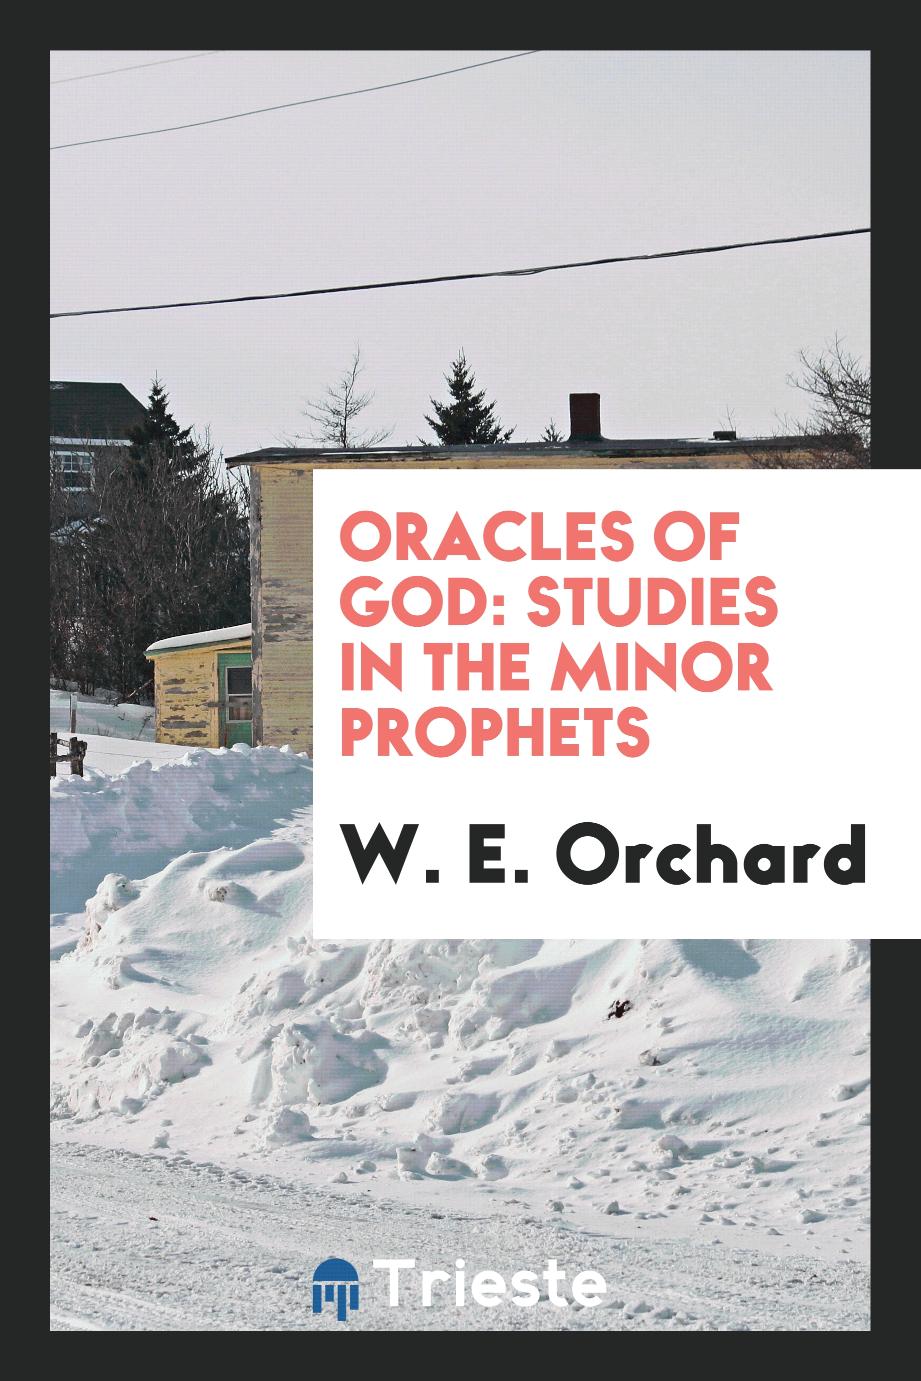 Oracles of God: studies in the Minor Prophets